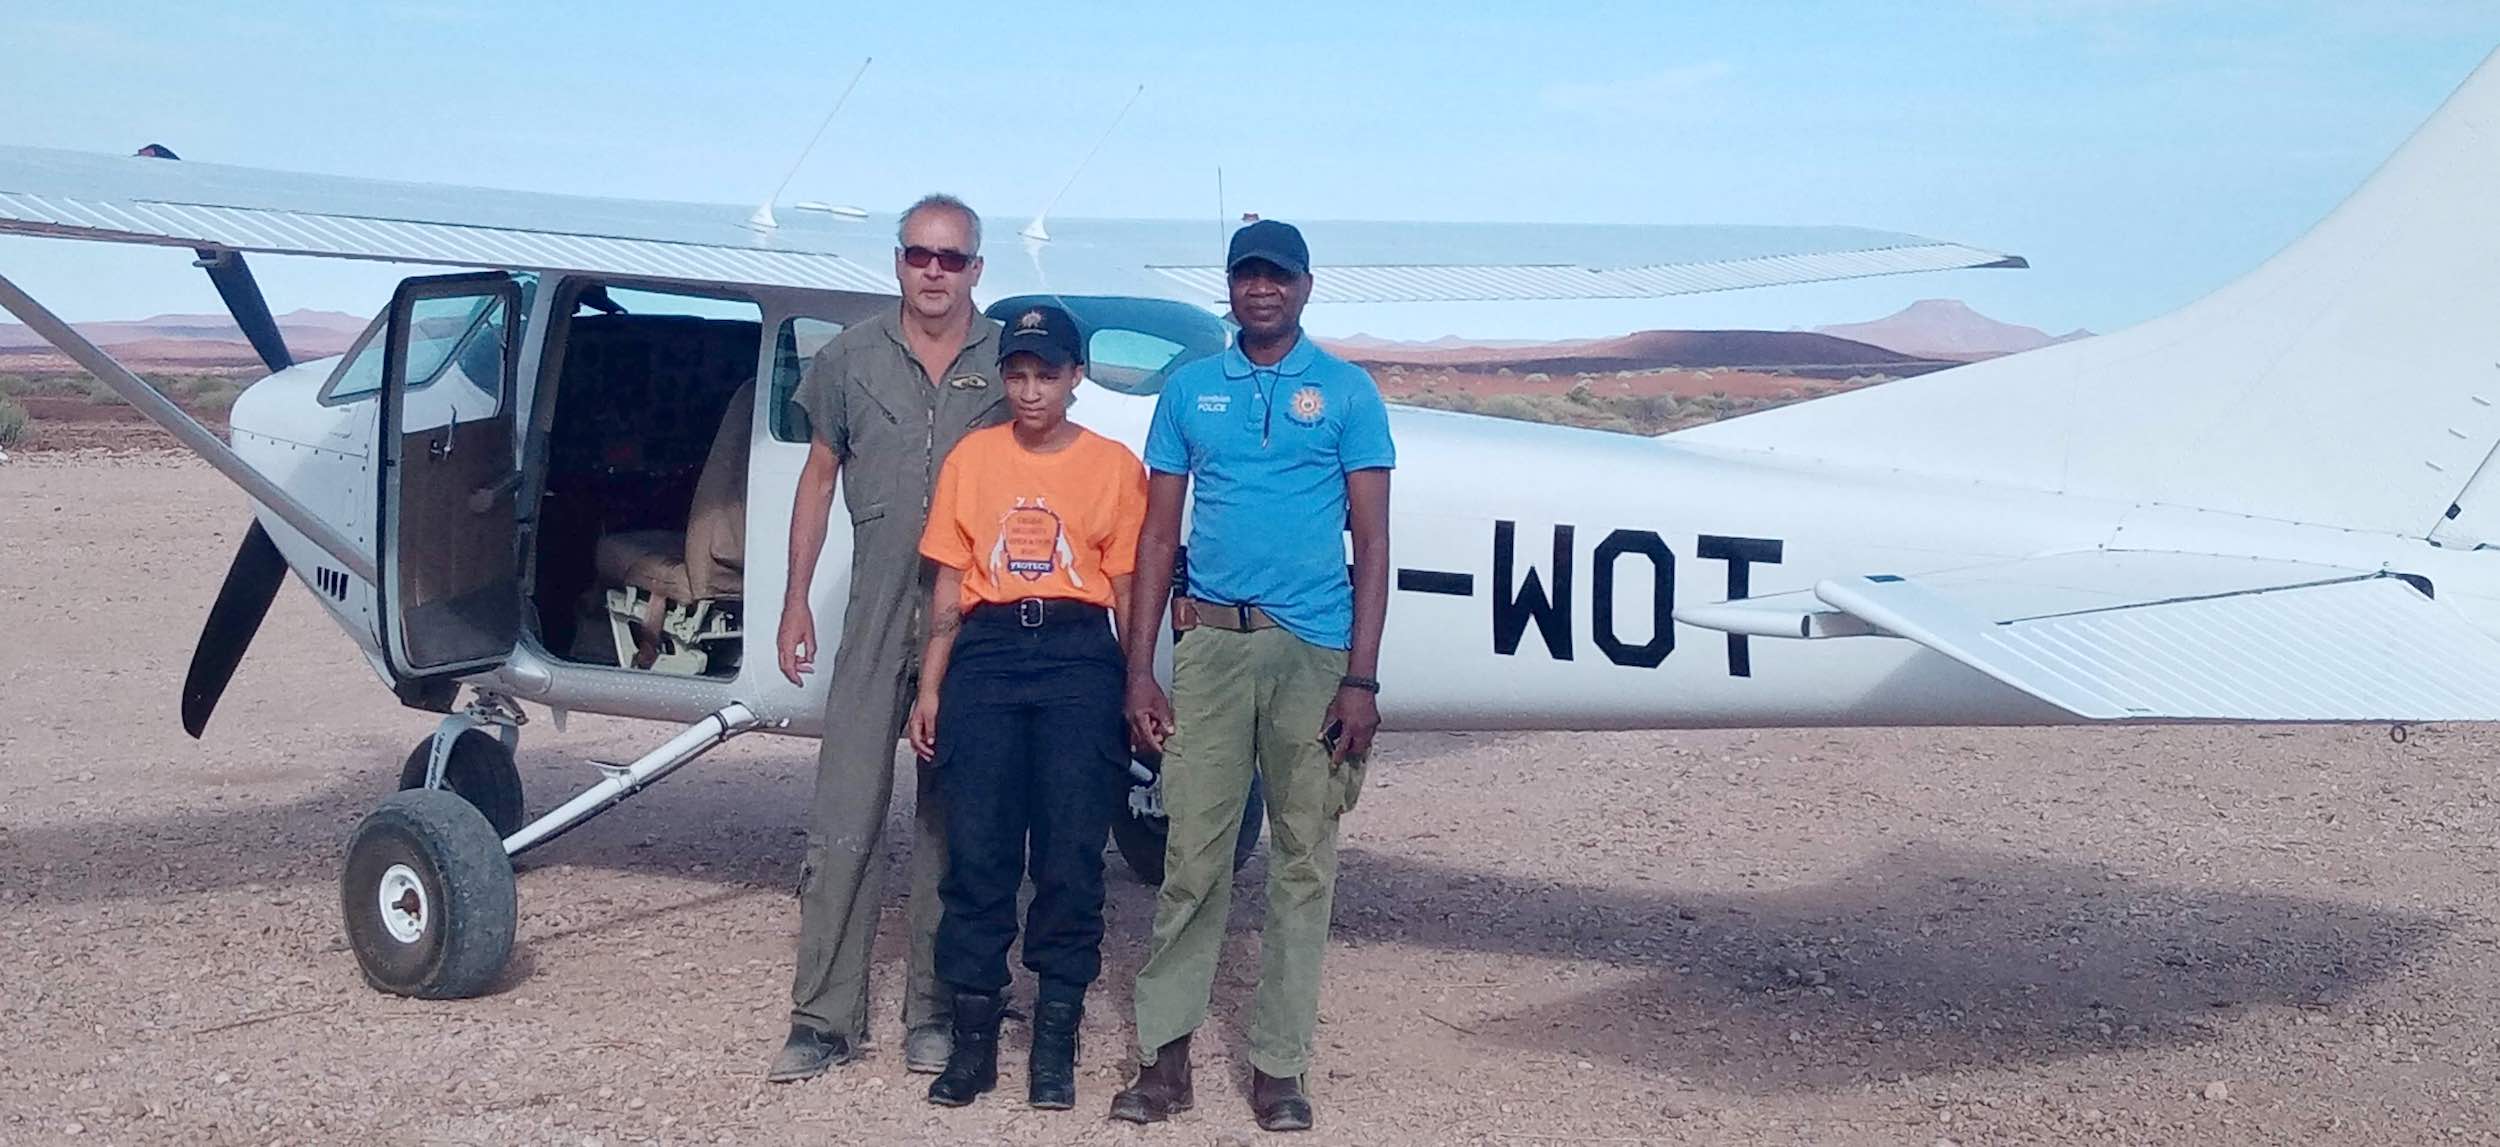 Two men and a woman stand in front of a Cessna light aircraft parked in the desert.